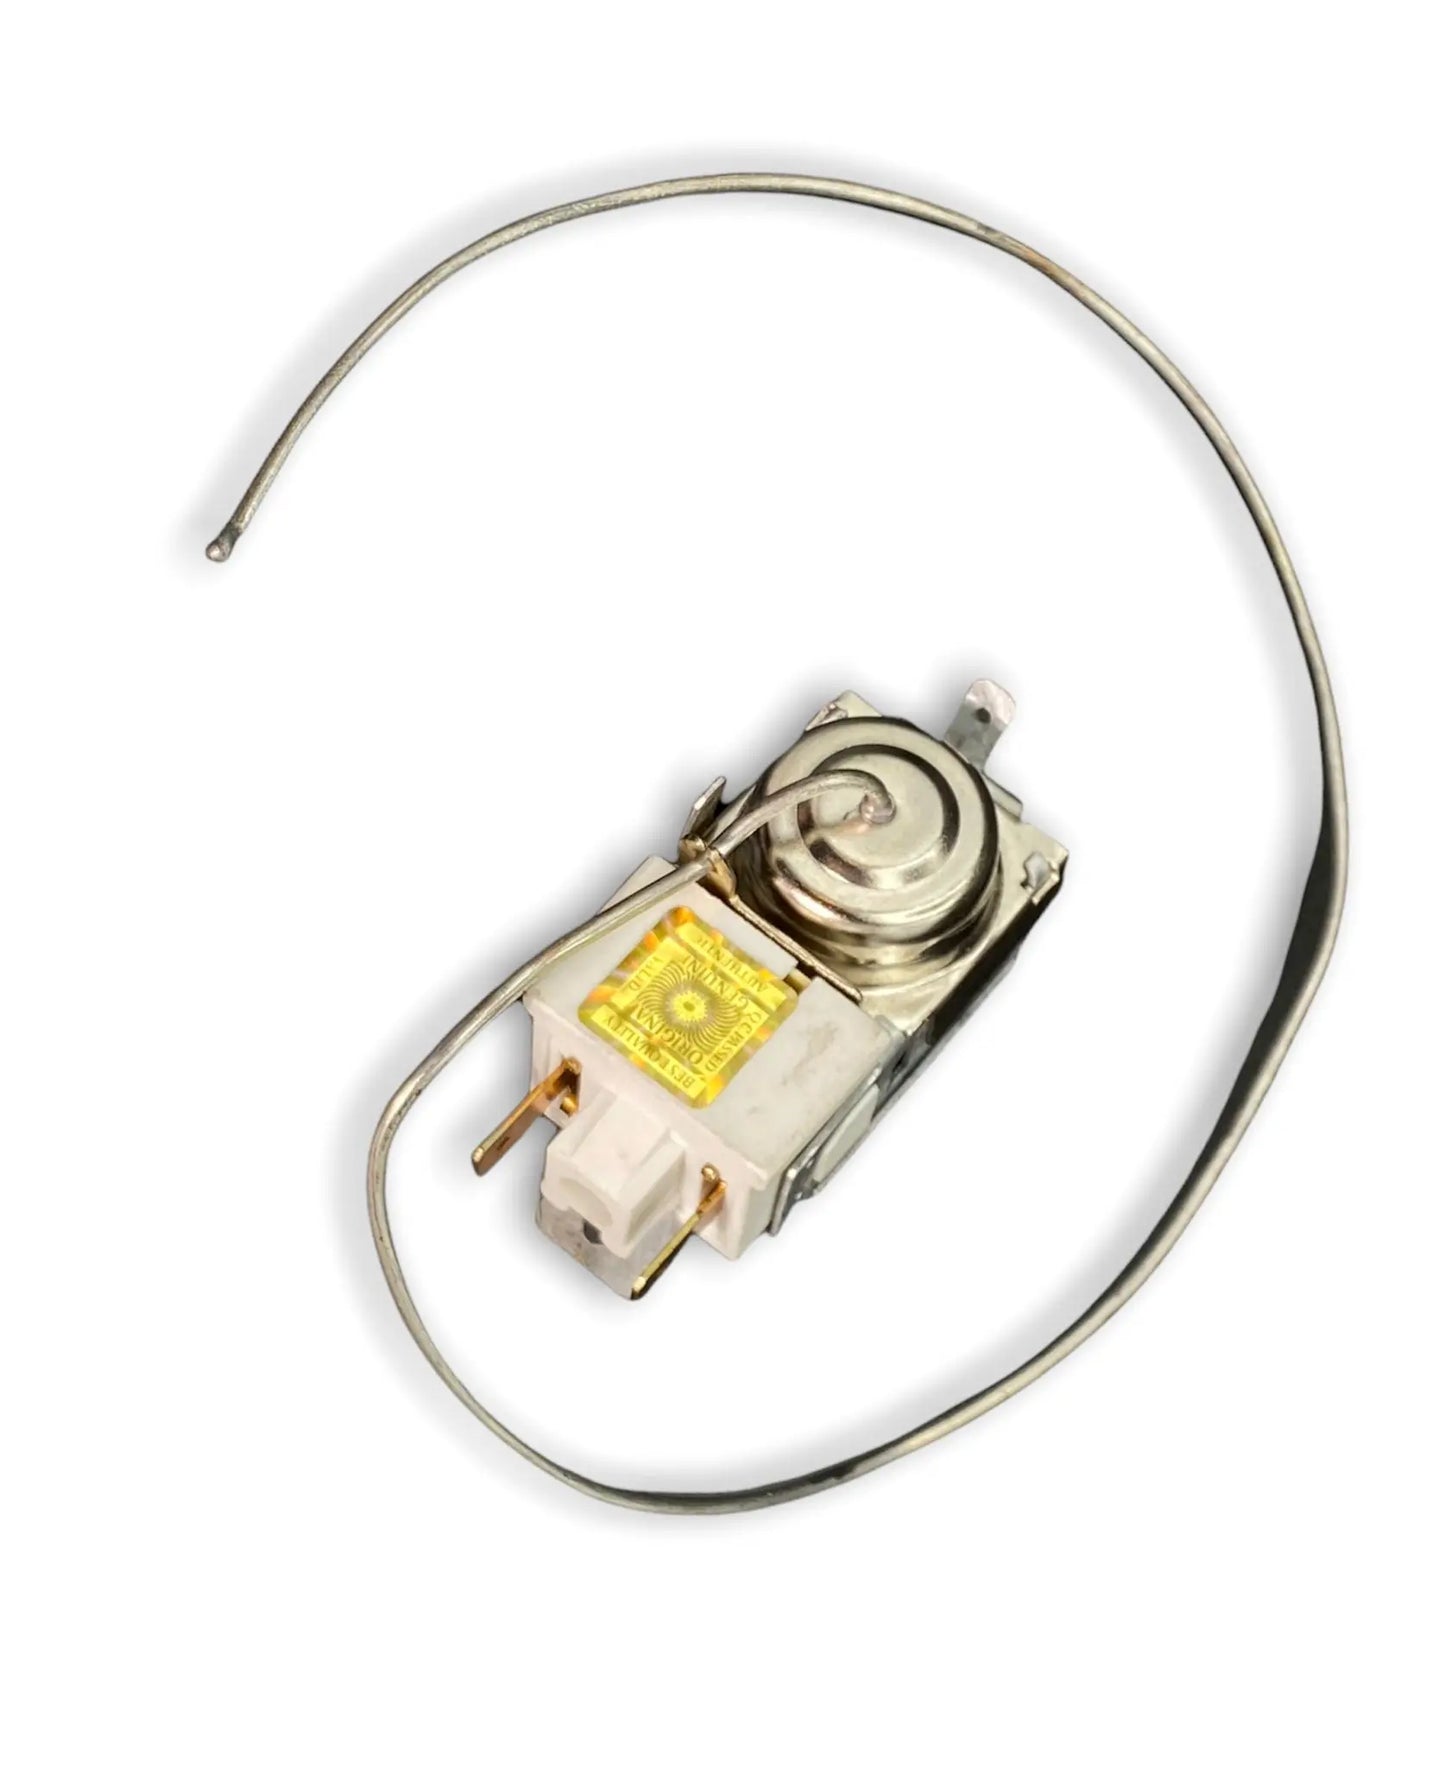 Whirlpool Refrigerator Temperature Control (Thermostat) - 12000034 , REPLACES: 1659402 52881-23 52881-3 52881-39 52881-41 65268-2 69694-2 1743 EAP2002796 PS2002796 AP4009816 PD00030778 INVERTEC